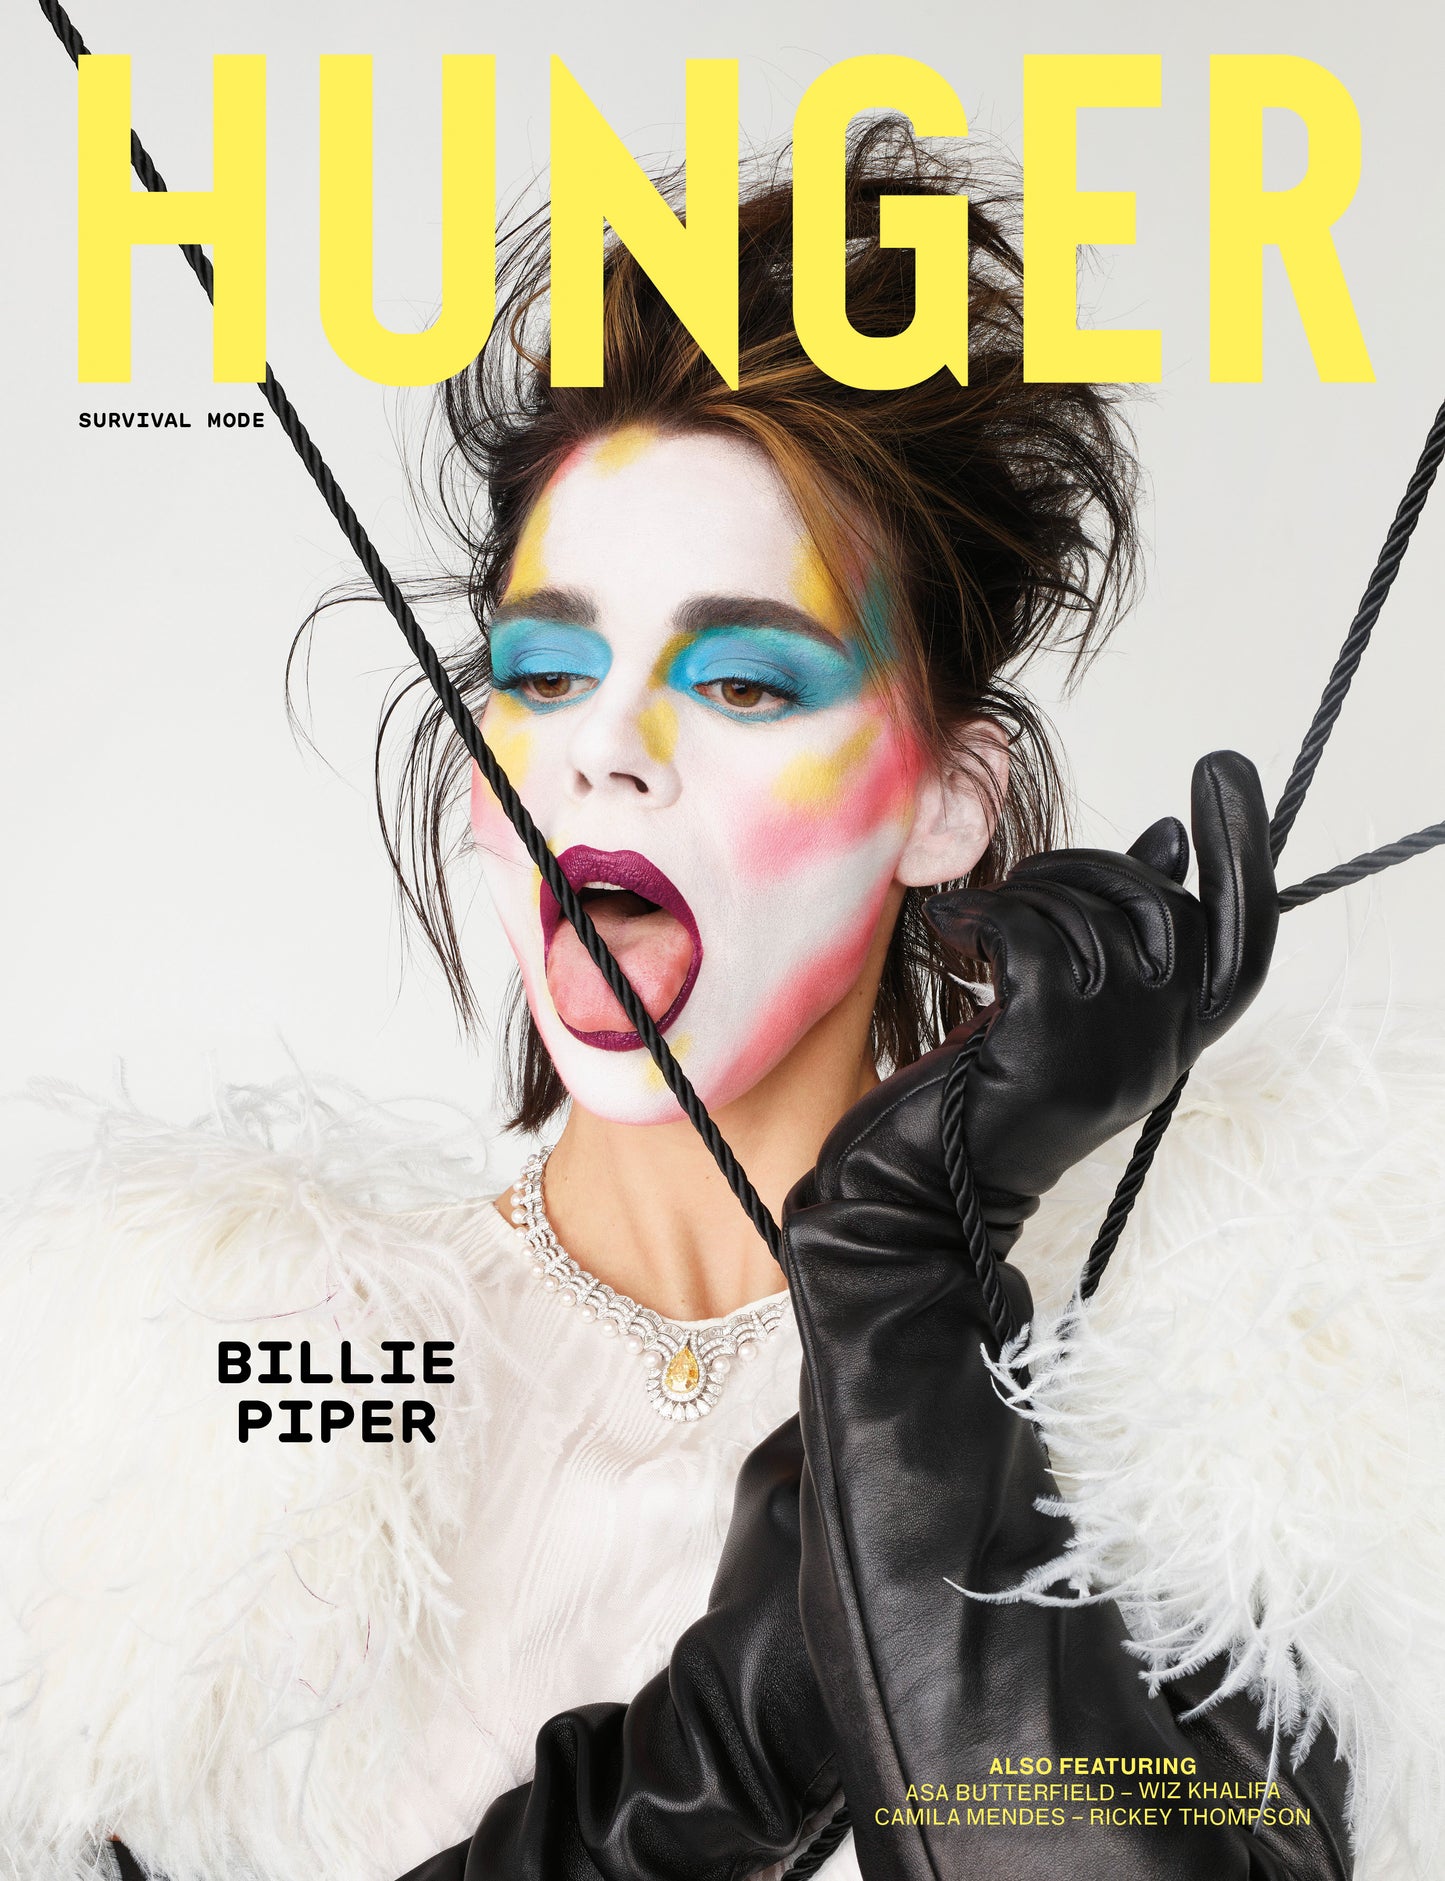 Billie Piper covers the Survival Mode issue